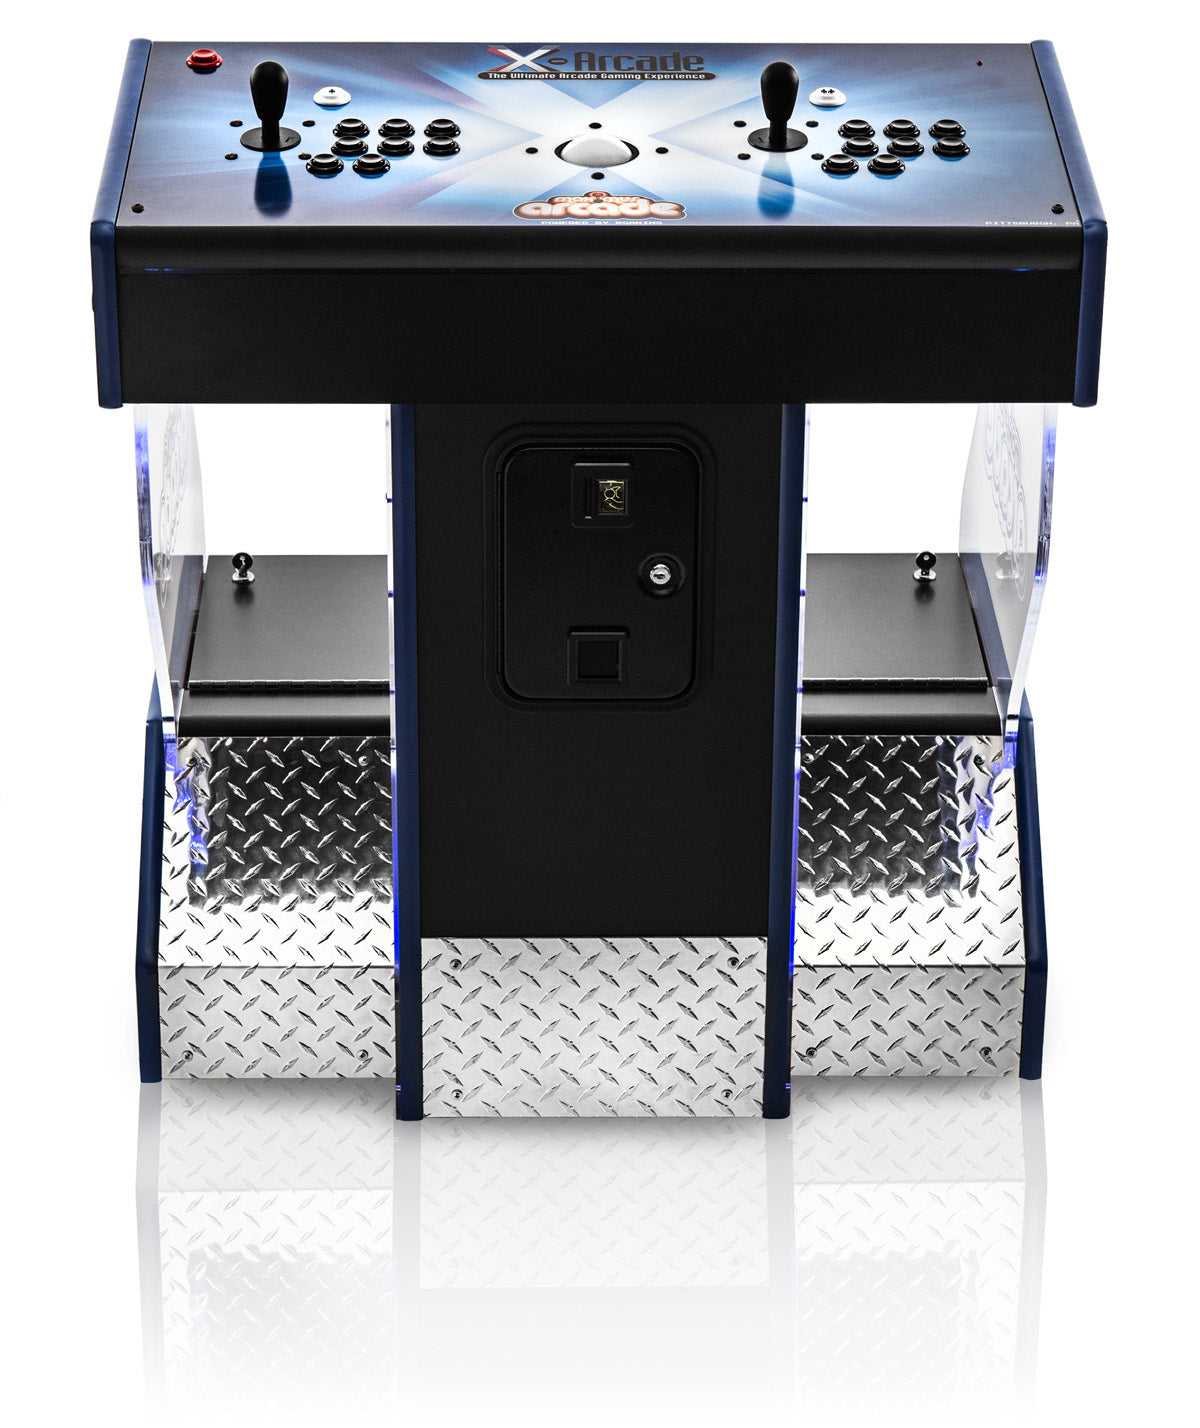 Xgaming X-Arcade Indestructible Arcade Game Controllers and Arcade Machine  Cabinets